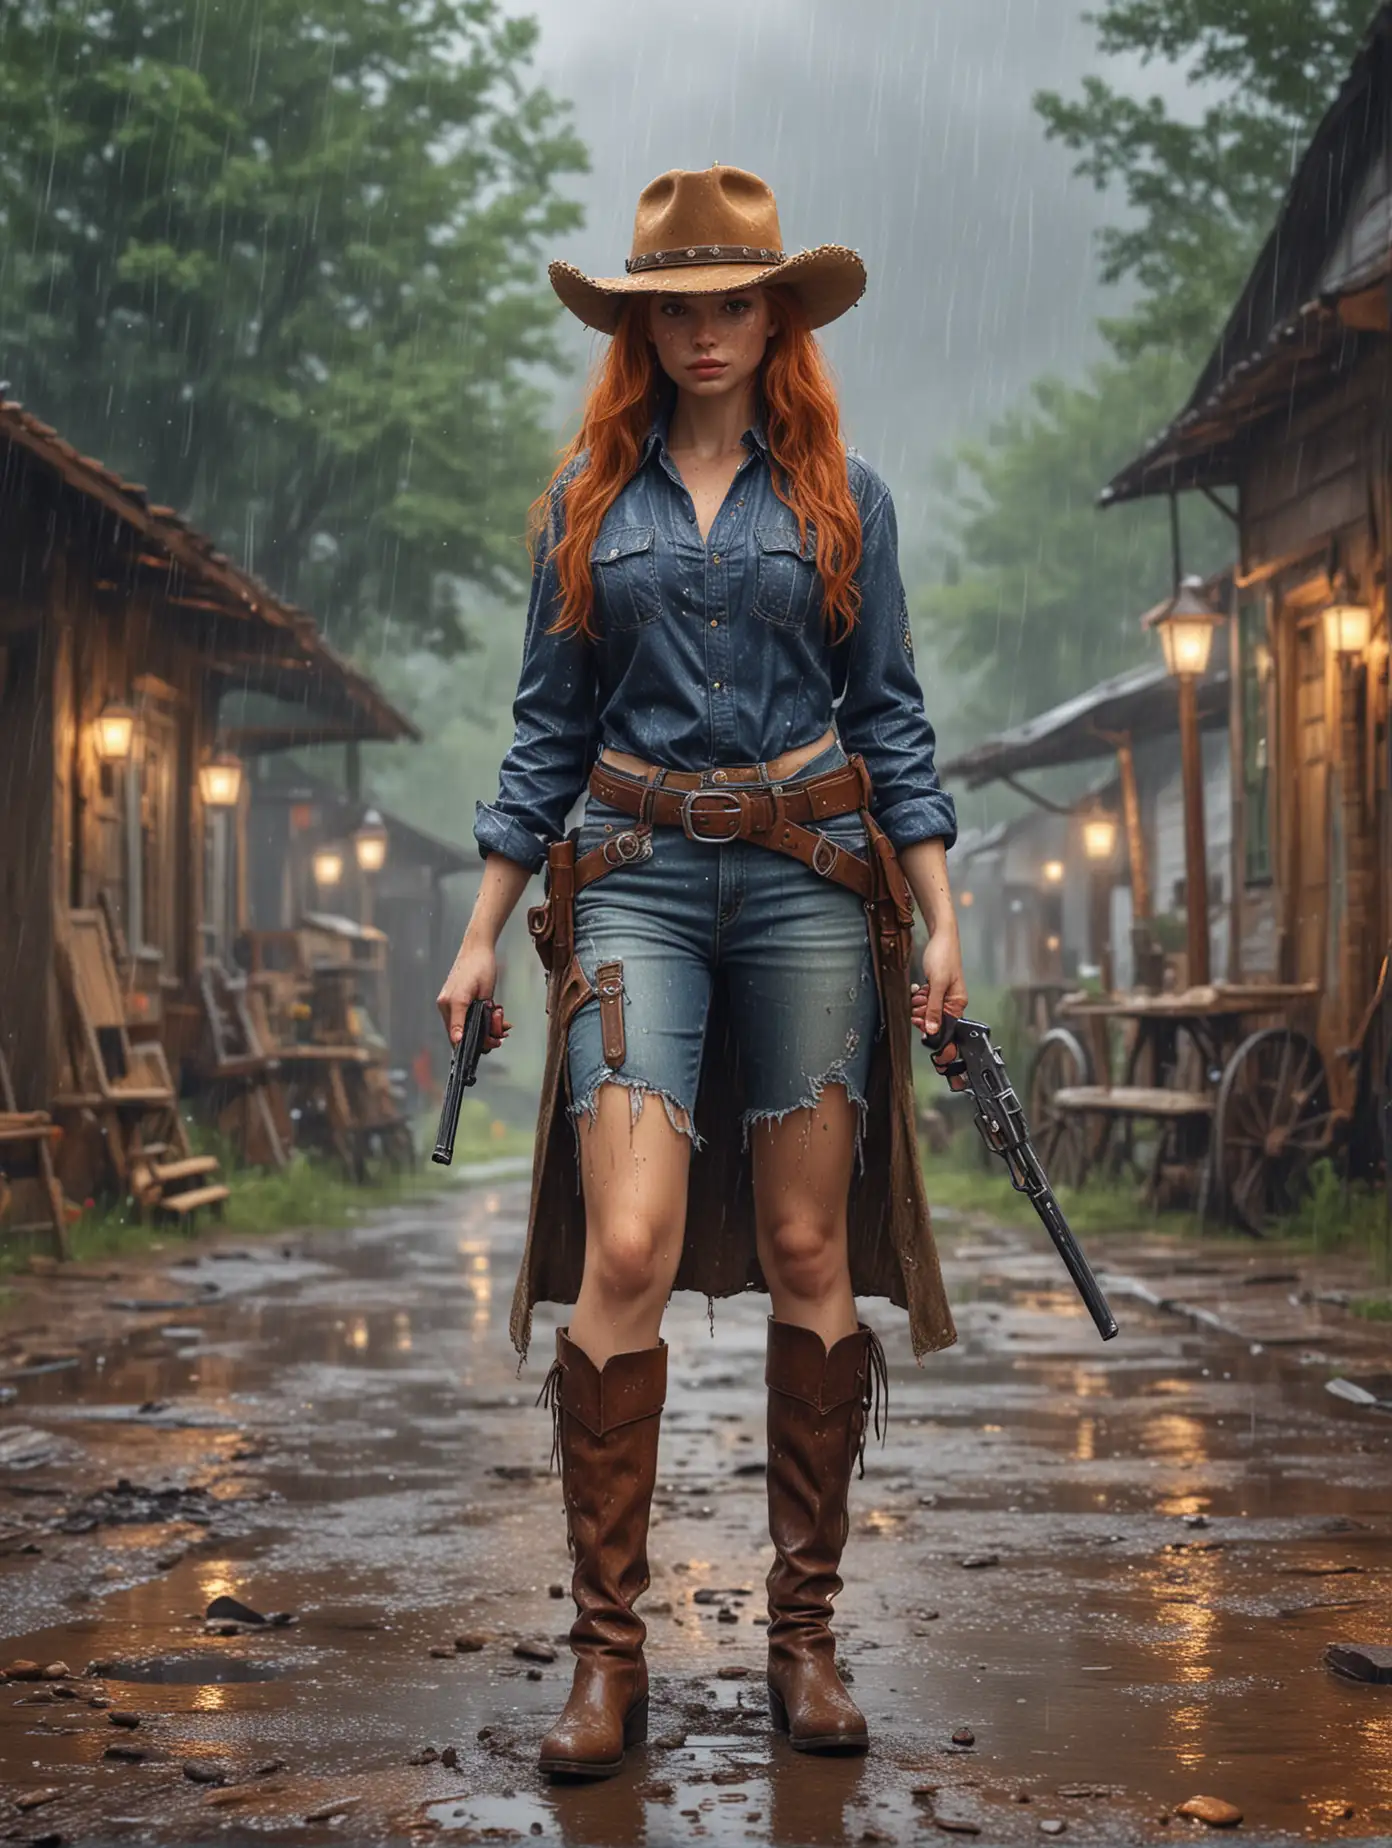 Beautiful-Ginger-Girl-in-Cowboy-Outfit-Walking-in-Rain-near-Vintage-Cottage